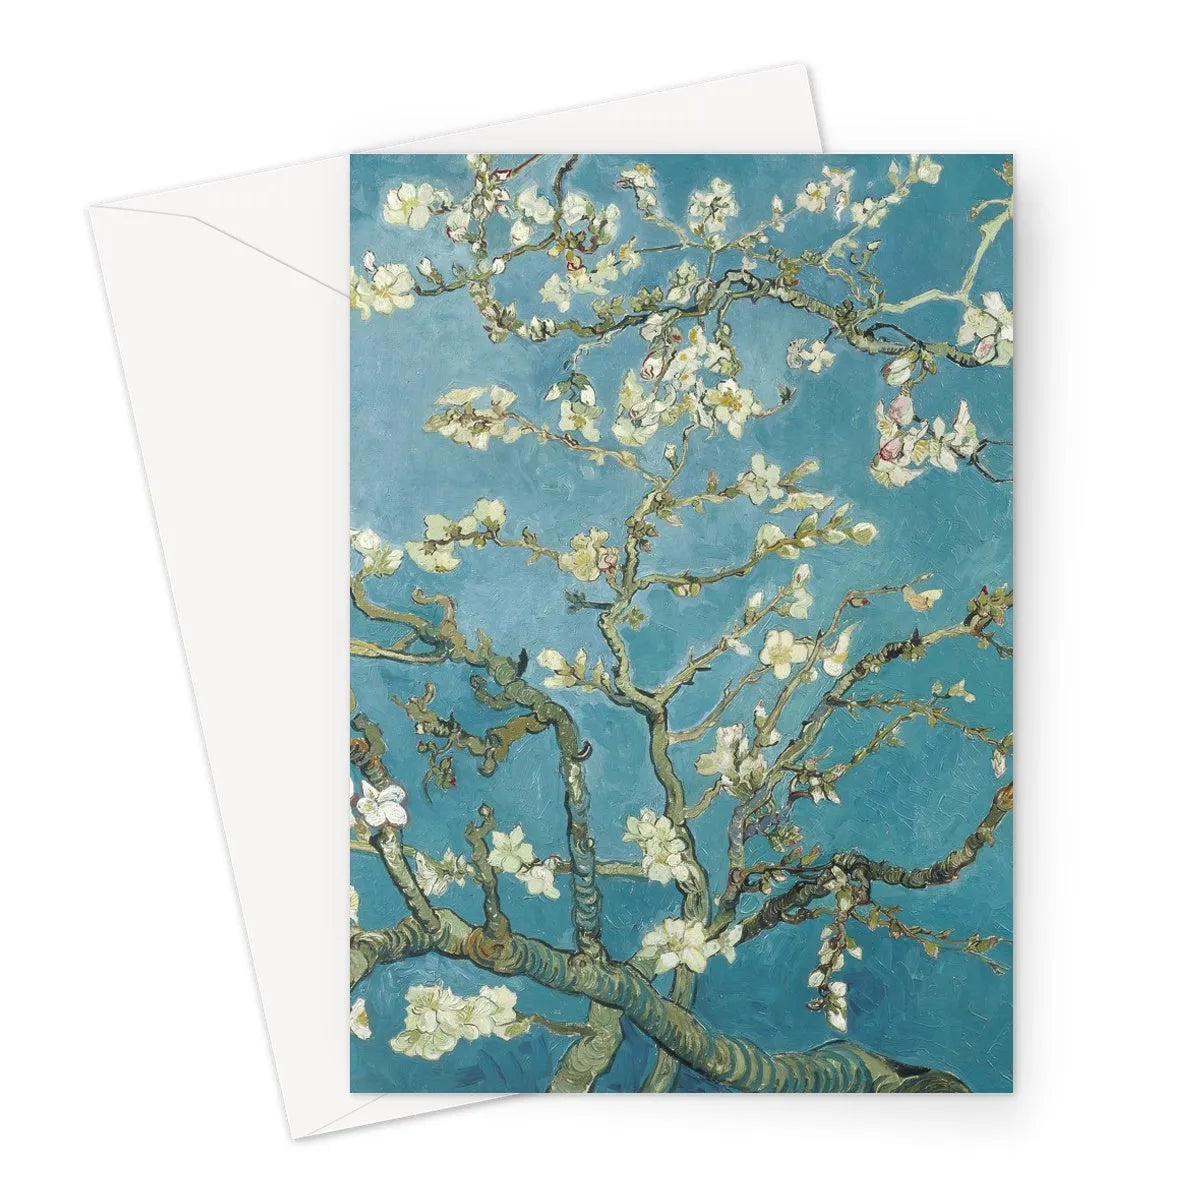 Almond Blossom By Vincent Van Gogh Greeting Card - A5 Portrait / 1 Card - Greeting & Note Cards - Aesthetic Art